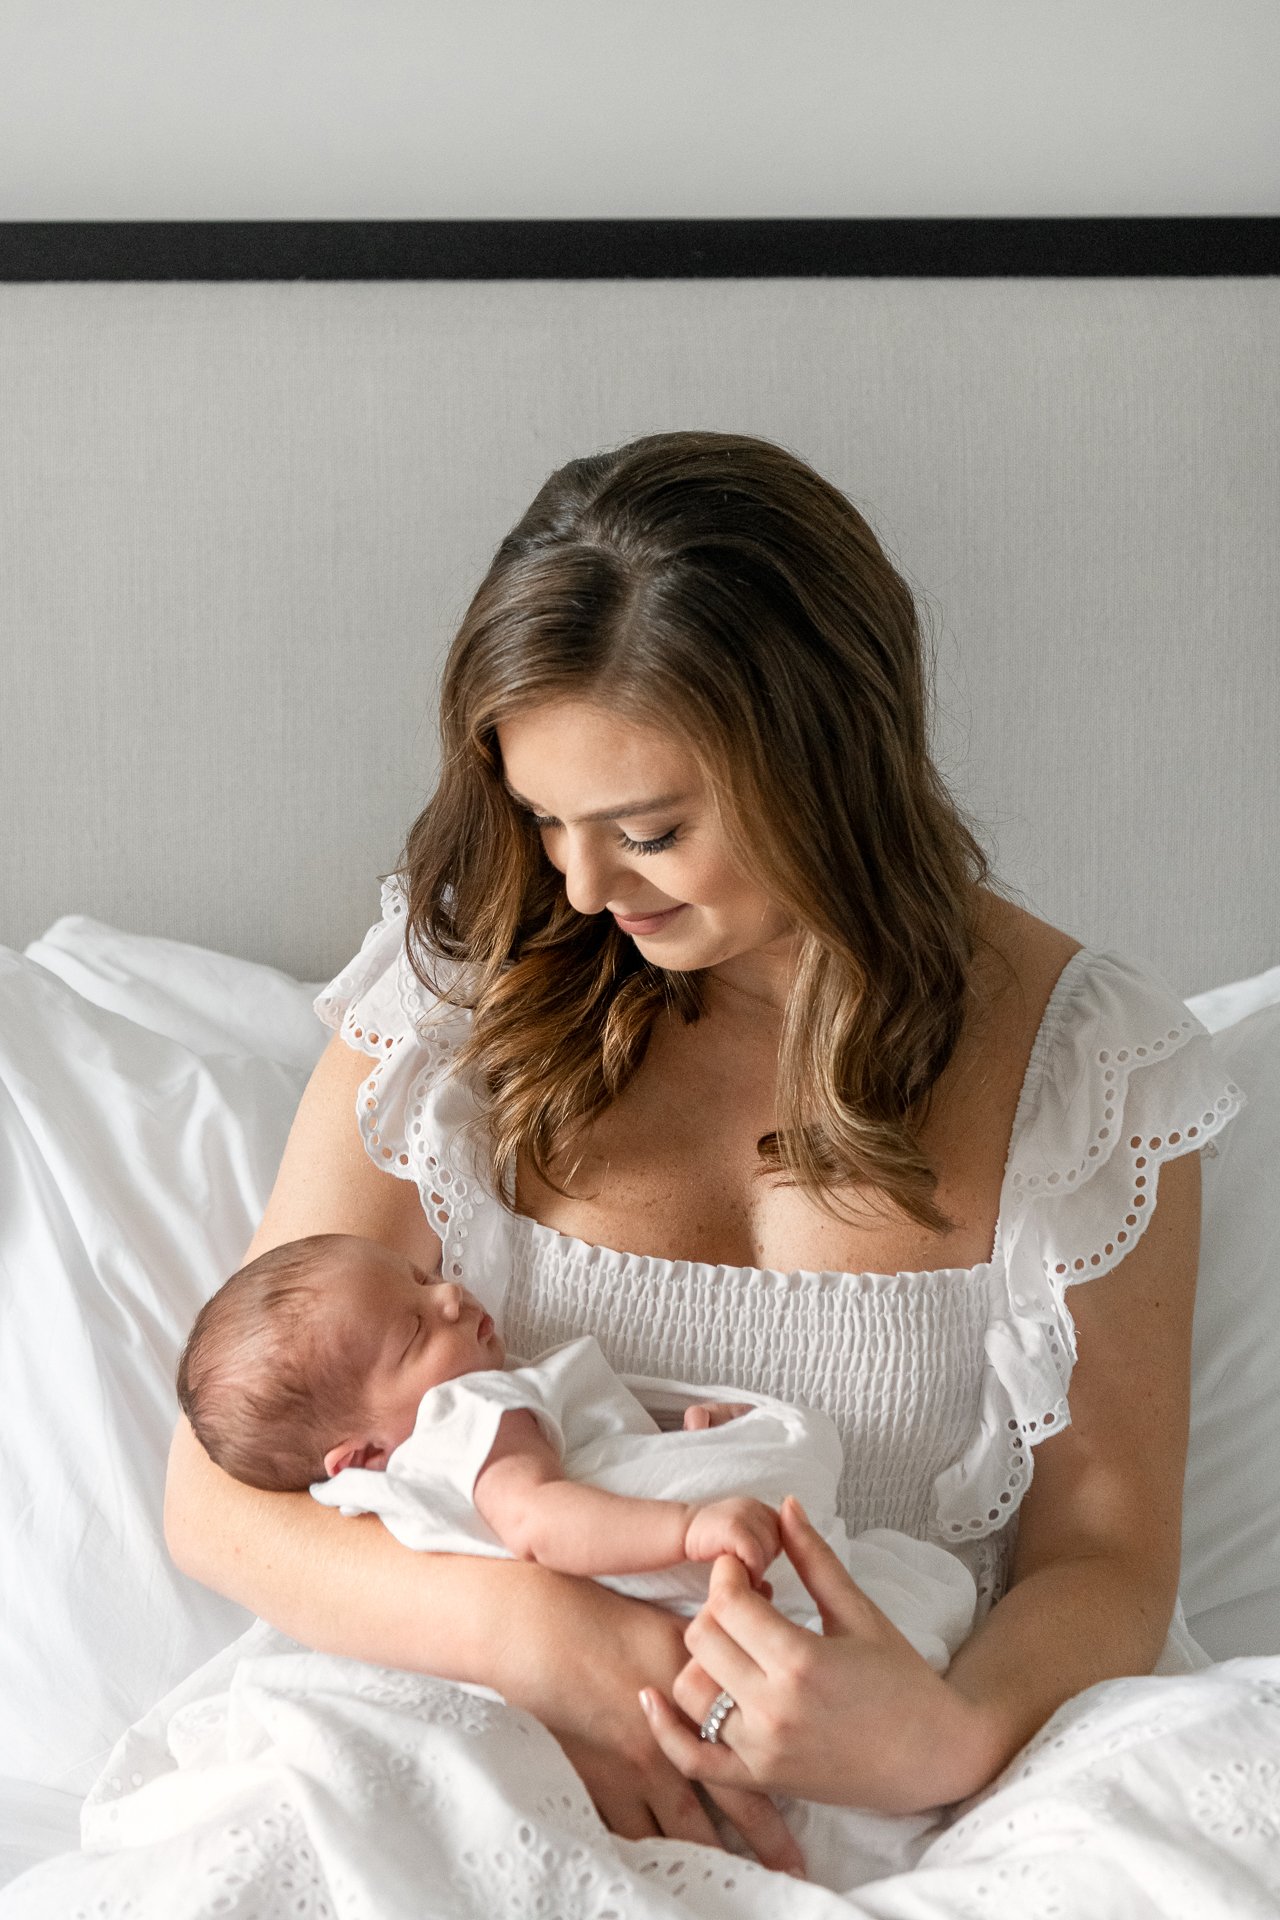  A mother in a white summer dress holds her new baby on a bed in NYC by Nicole Hawkins Photography. mother and baby portrait NYC baby photog #nicolehawkinsphotography #NYCbabyphotography #newbornportraits #NewYorkStudioPhotography #newbornsession 